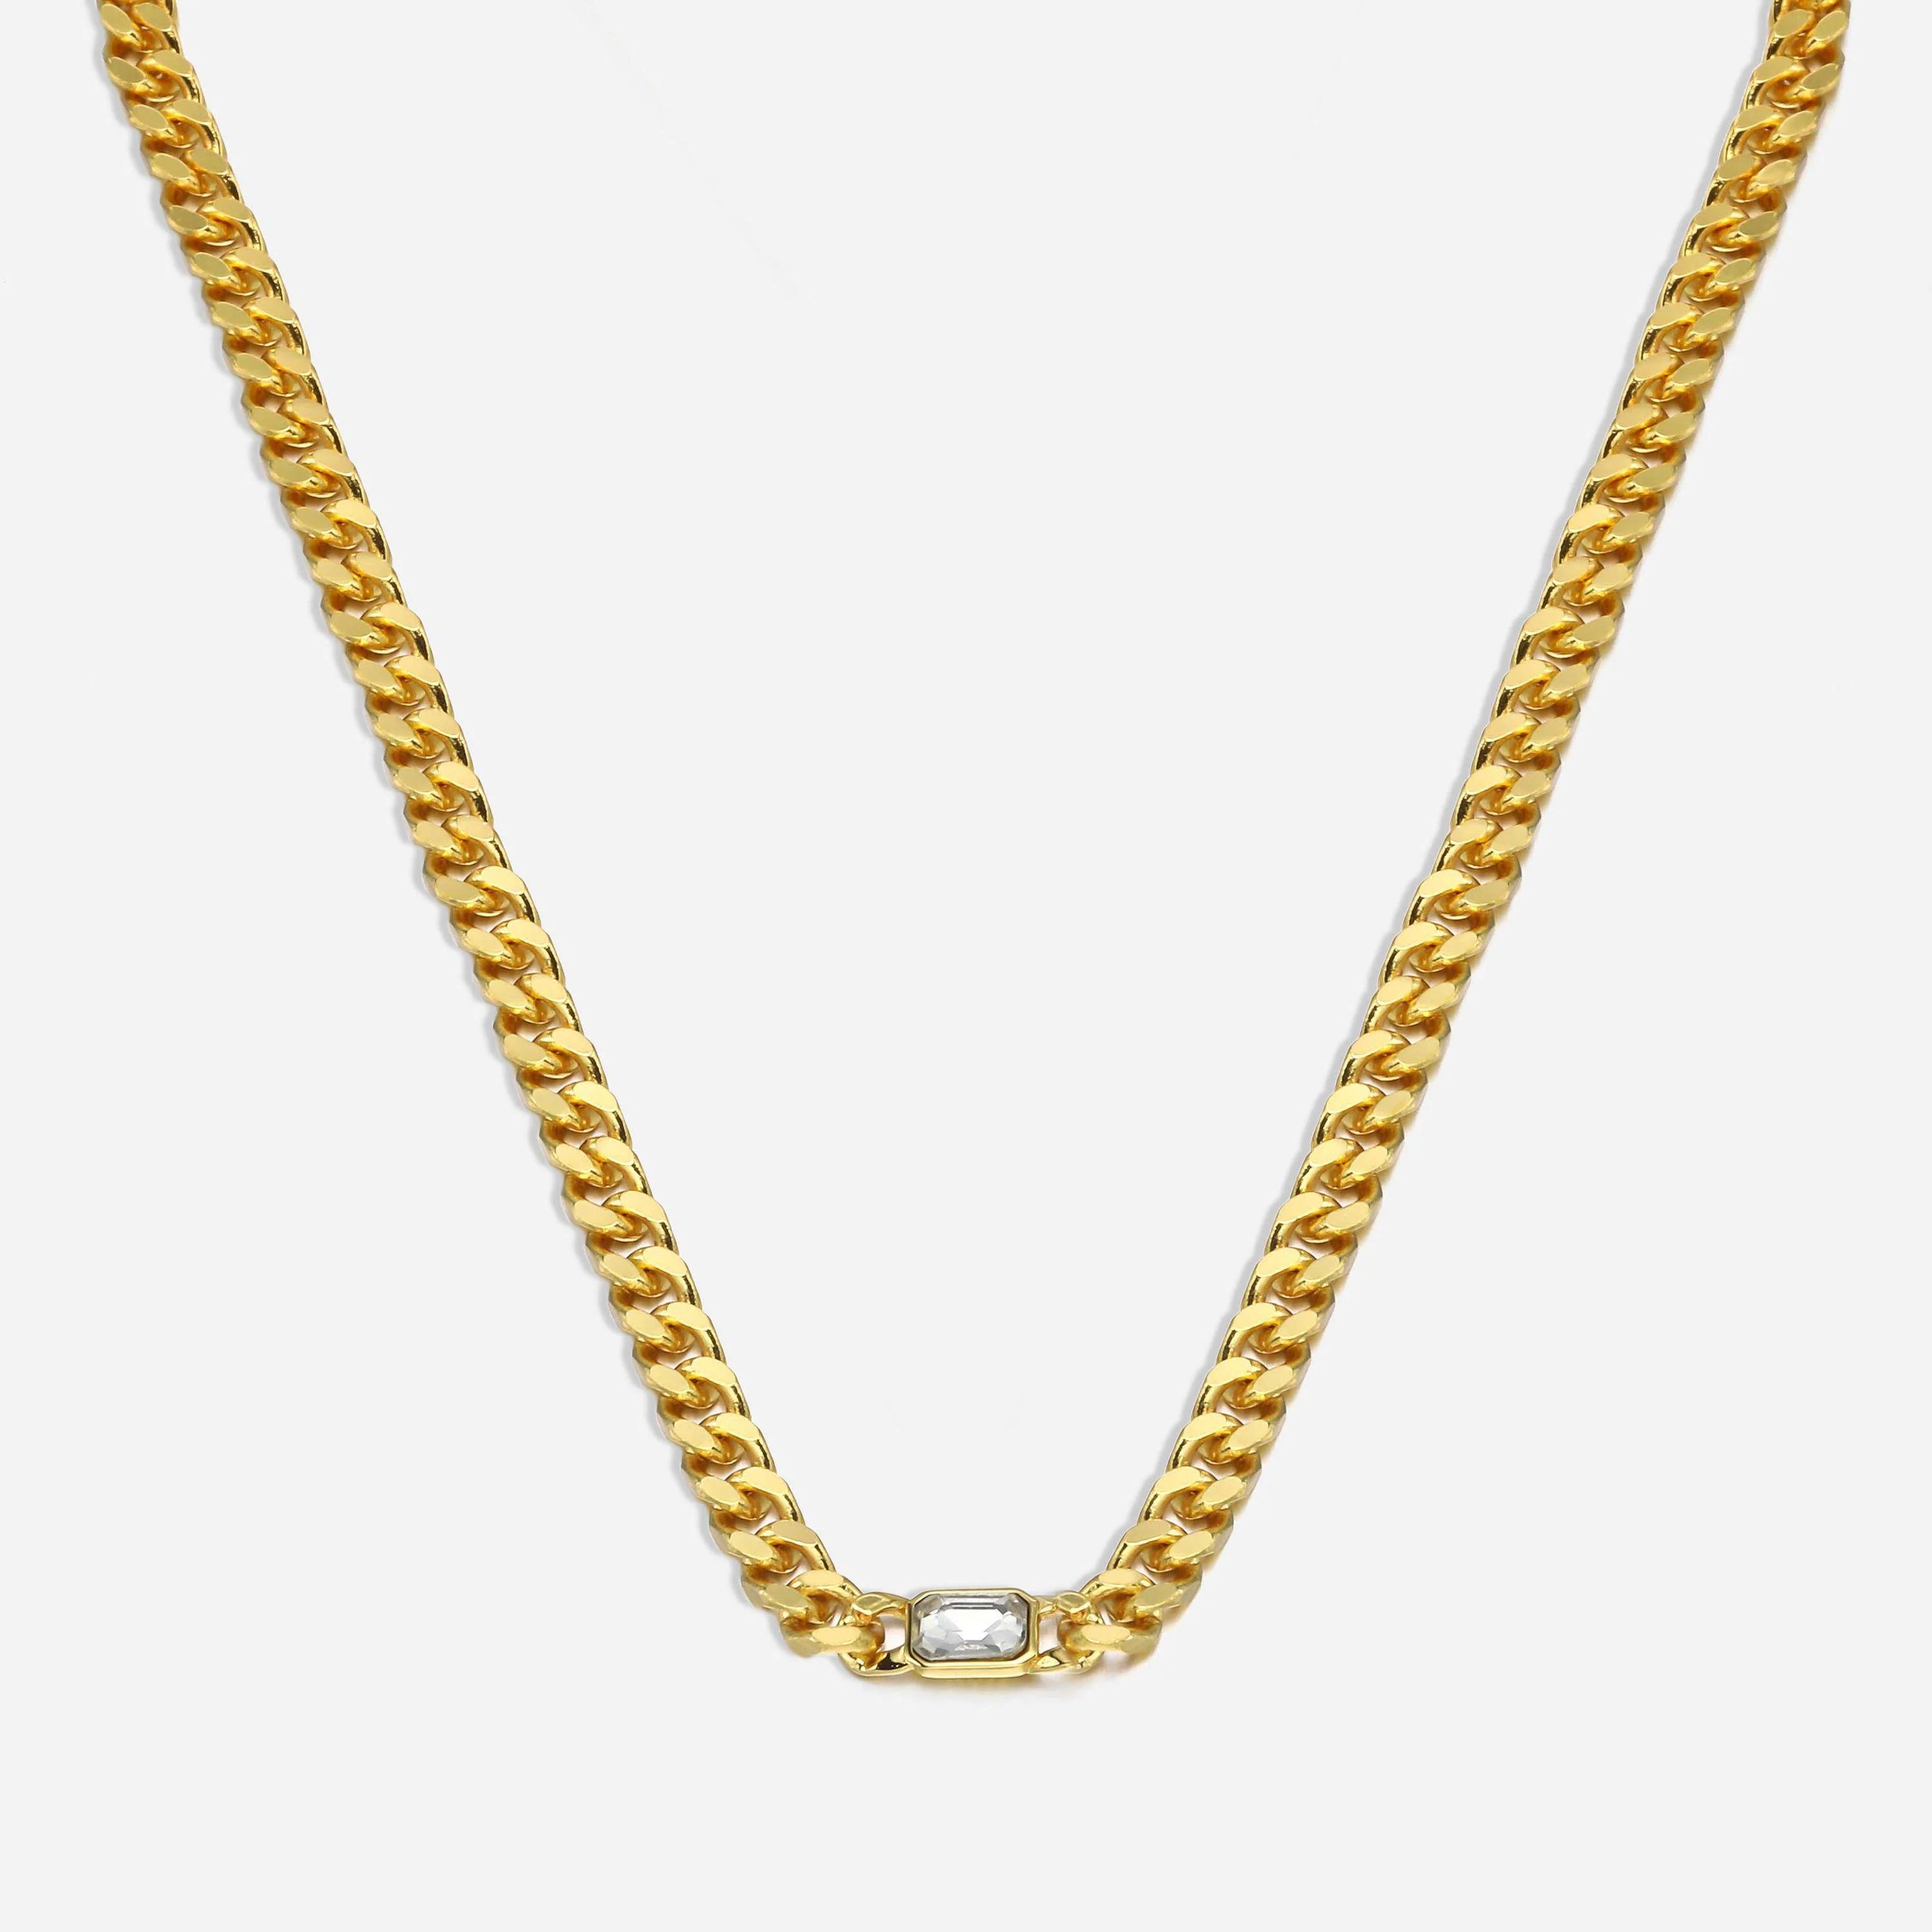 Rosemary Crystal Curb Chain Necklace | Victoria Emerson